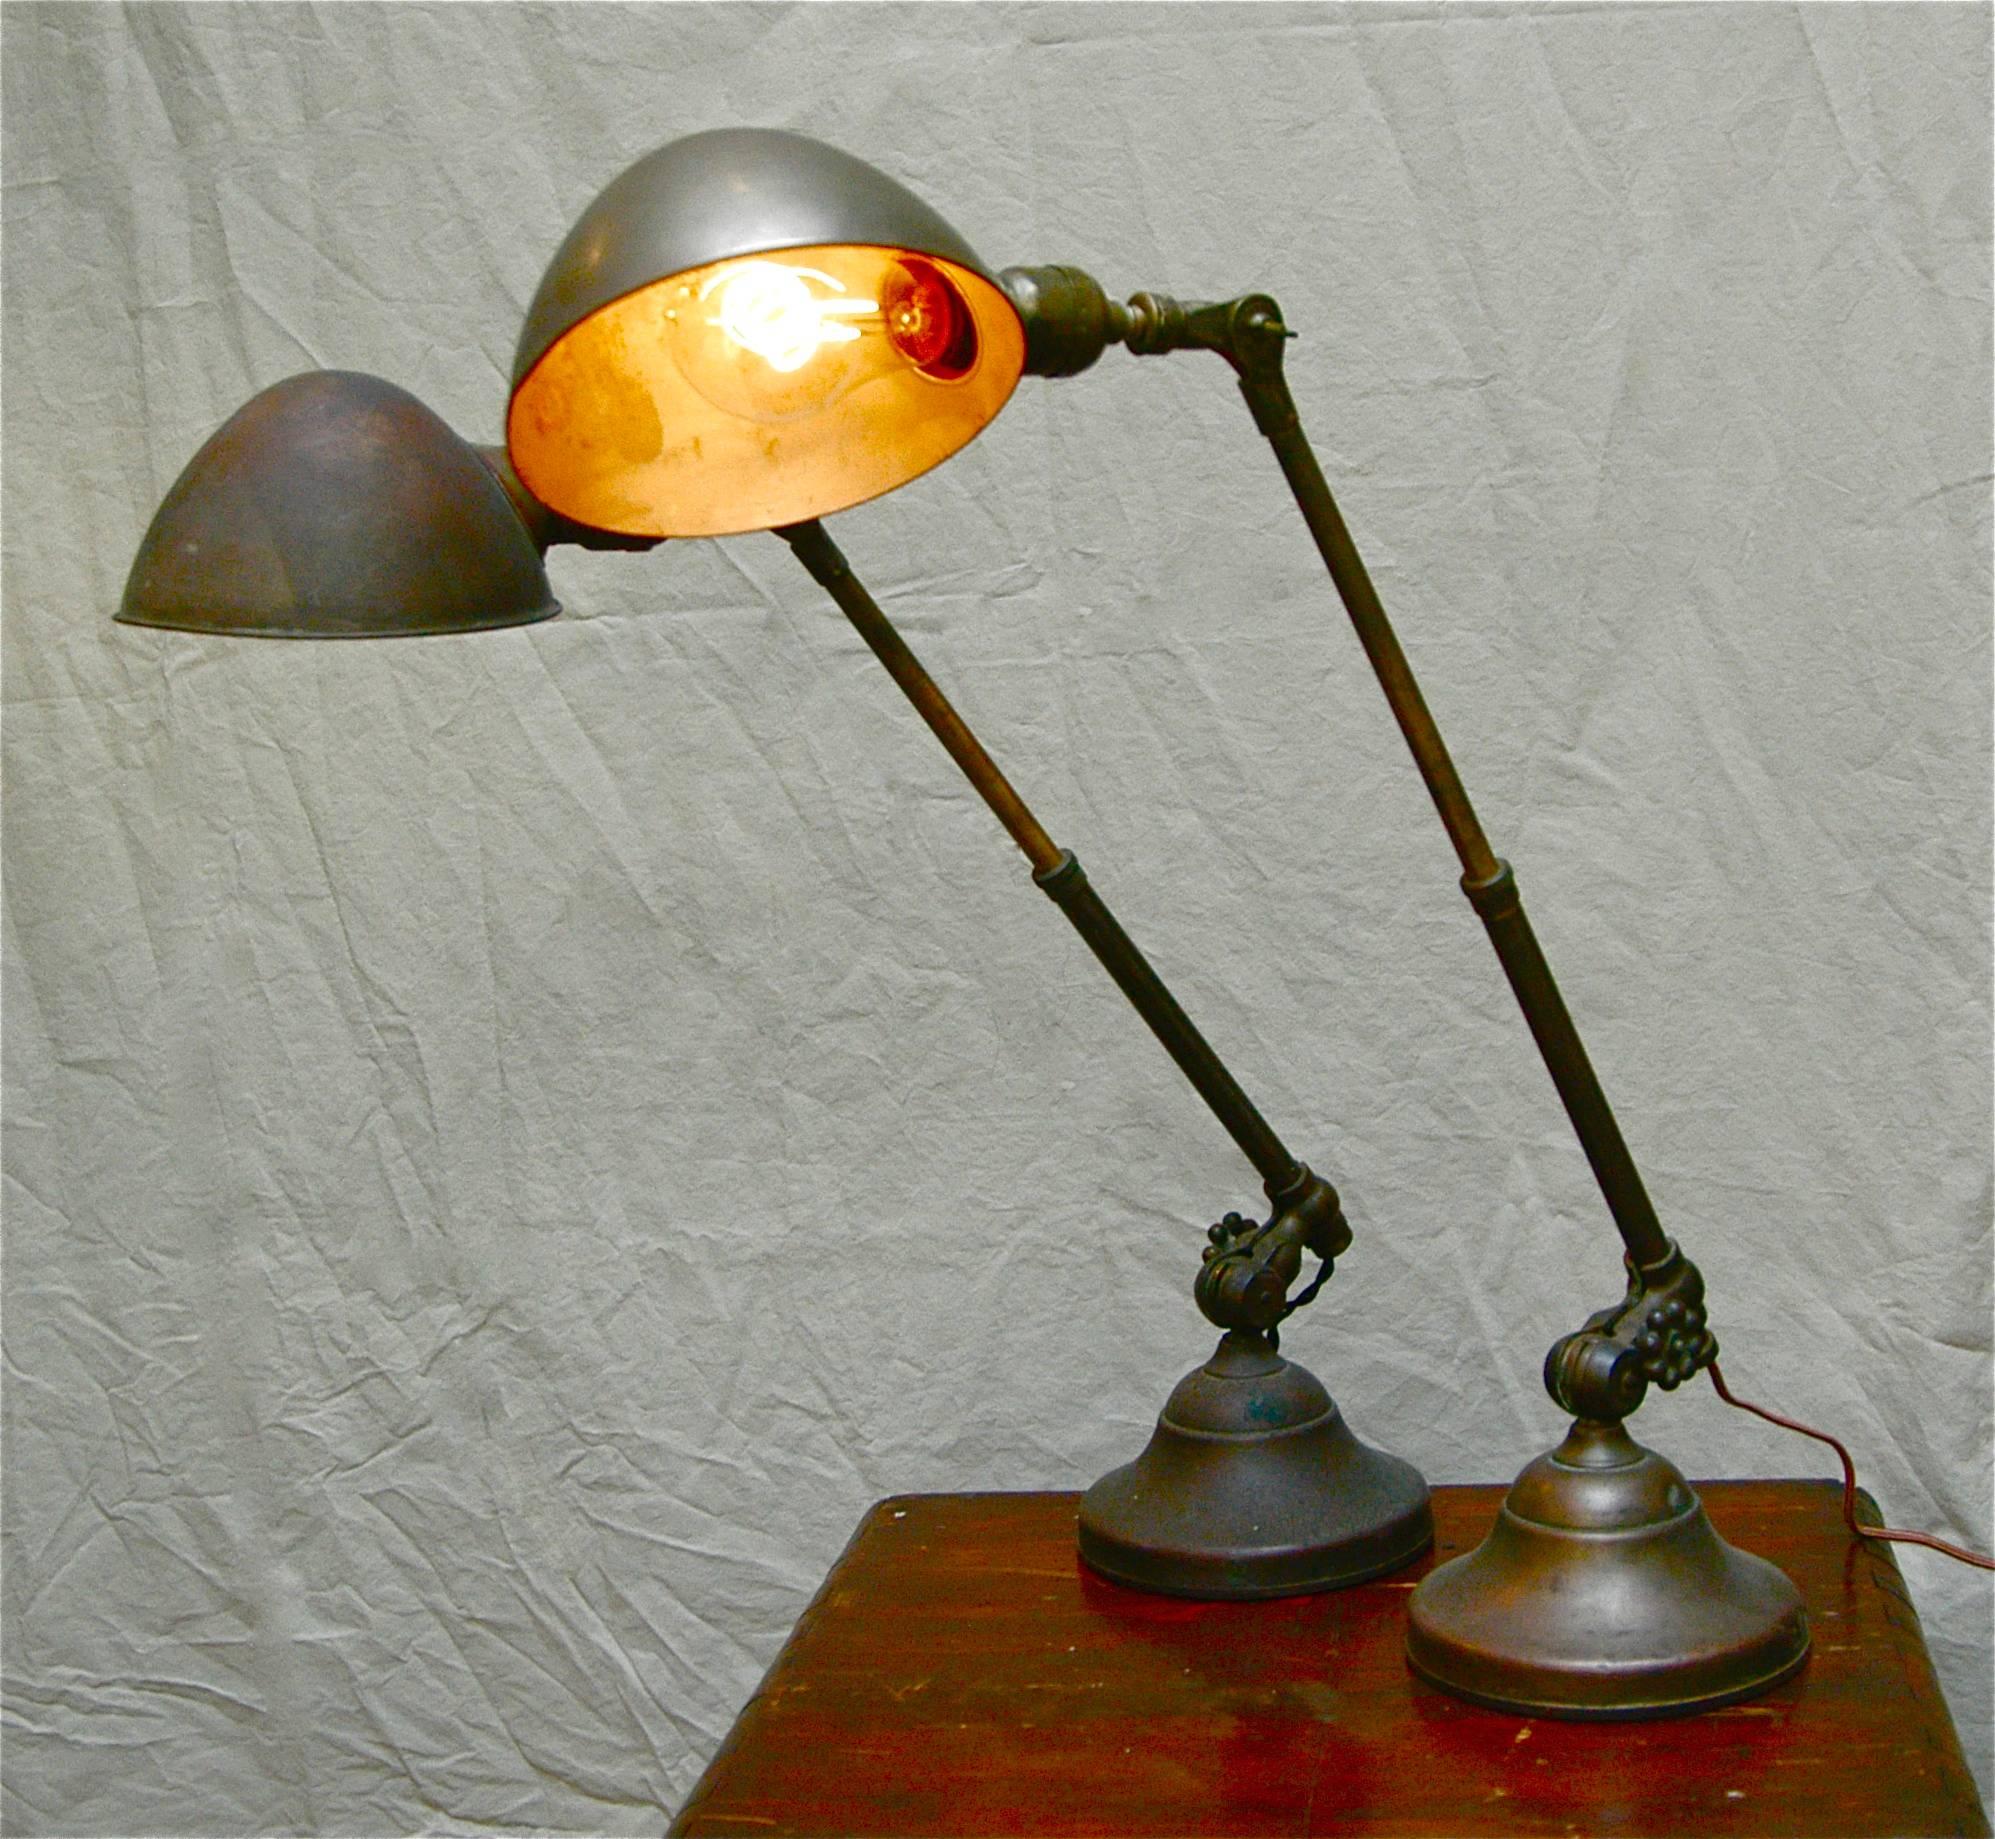 Pair of late 19th century, O.C. White, brass and steel, factory task lamps featuring extending telescopic arms. The lamps adjust from 15